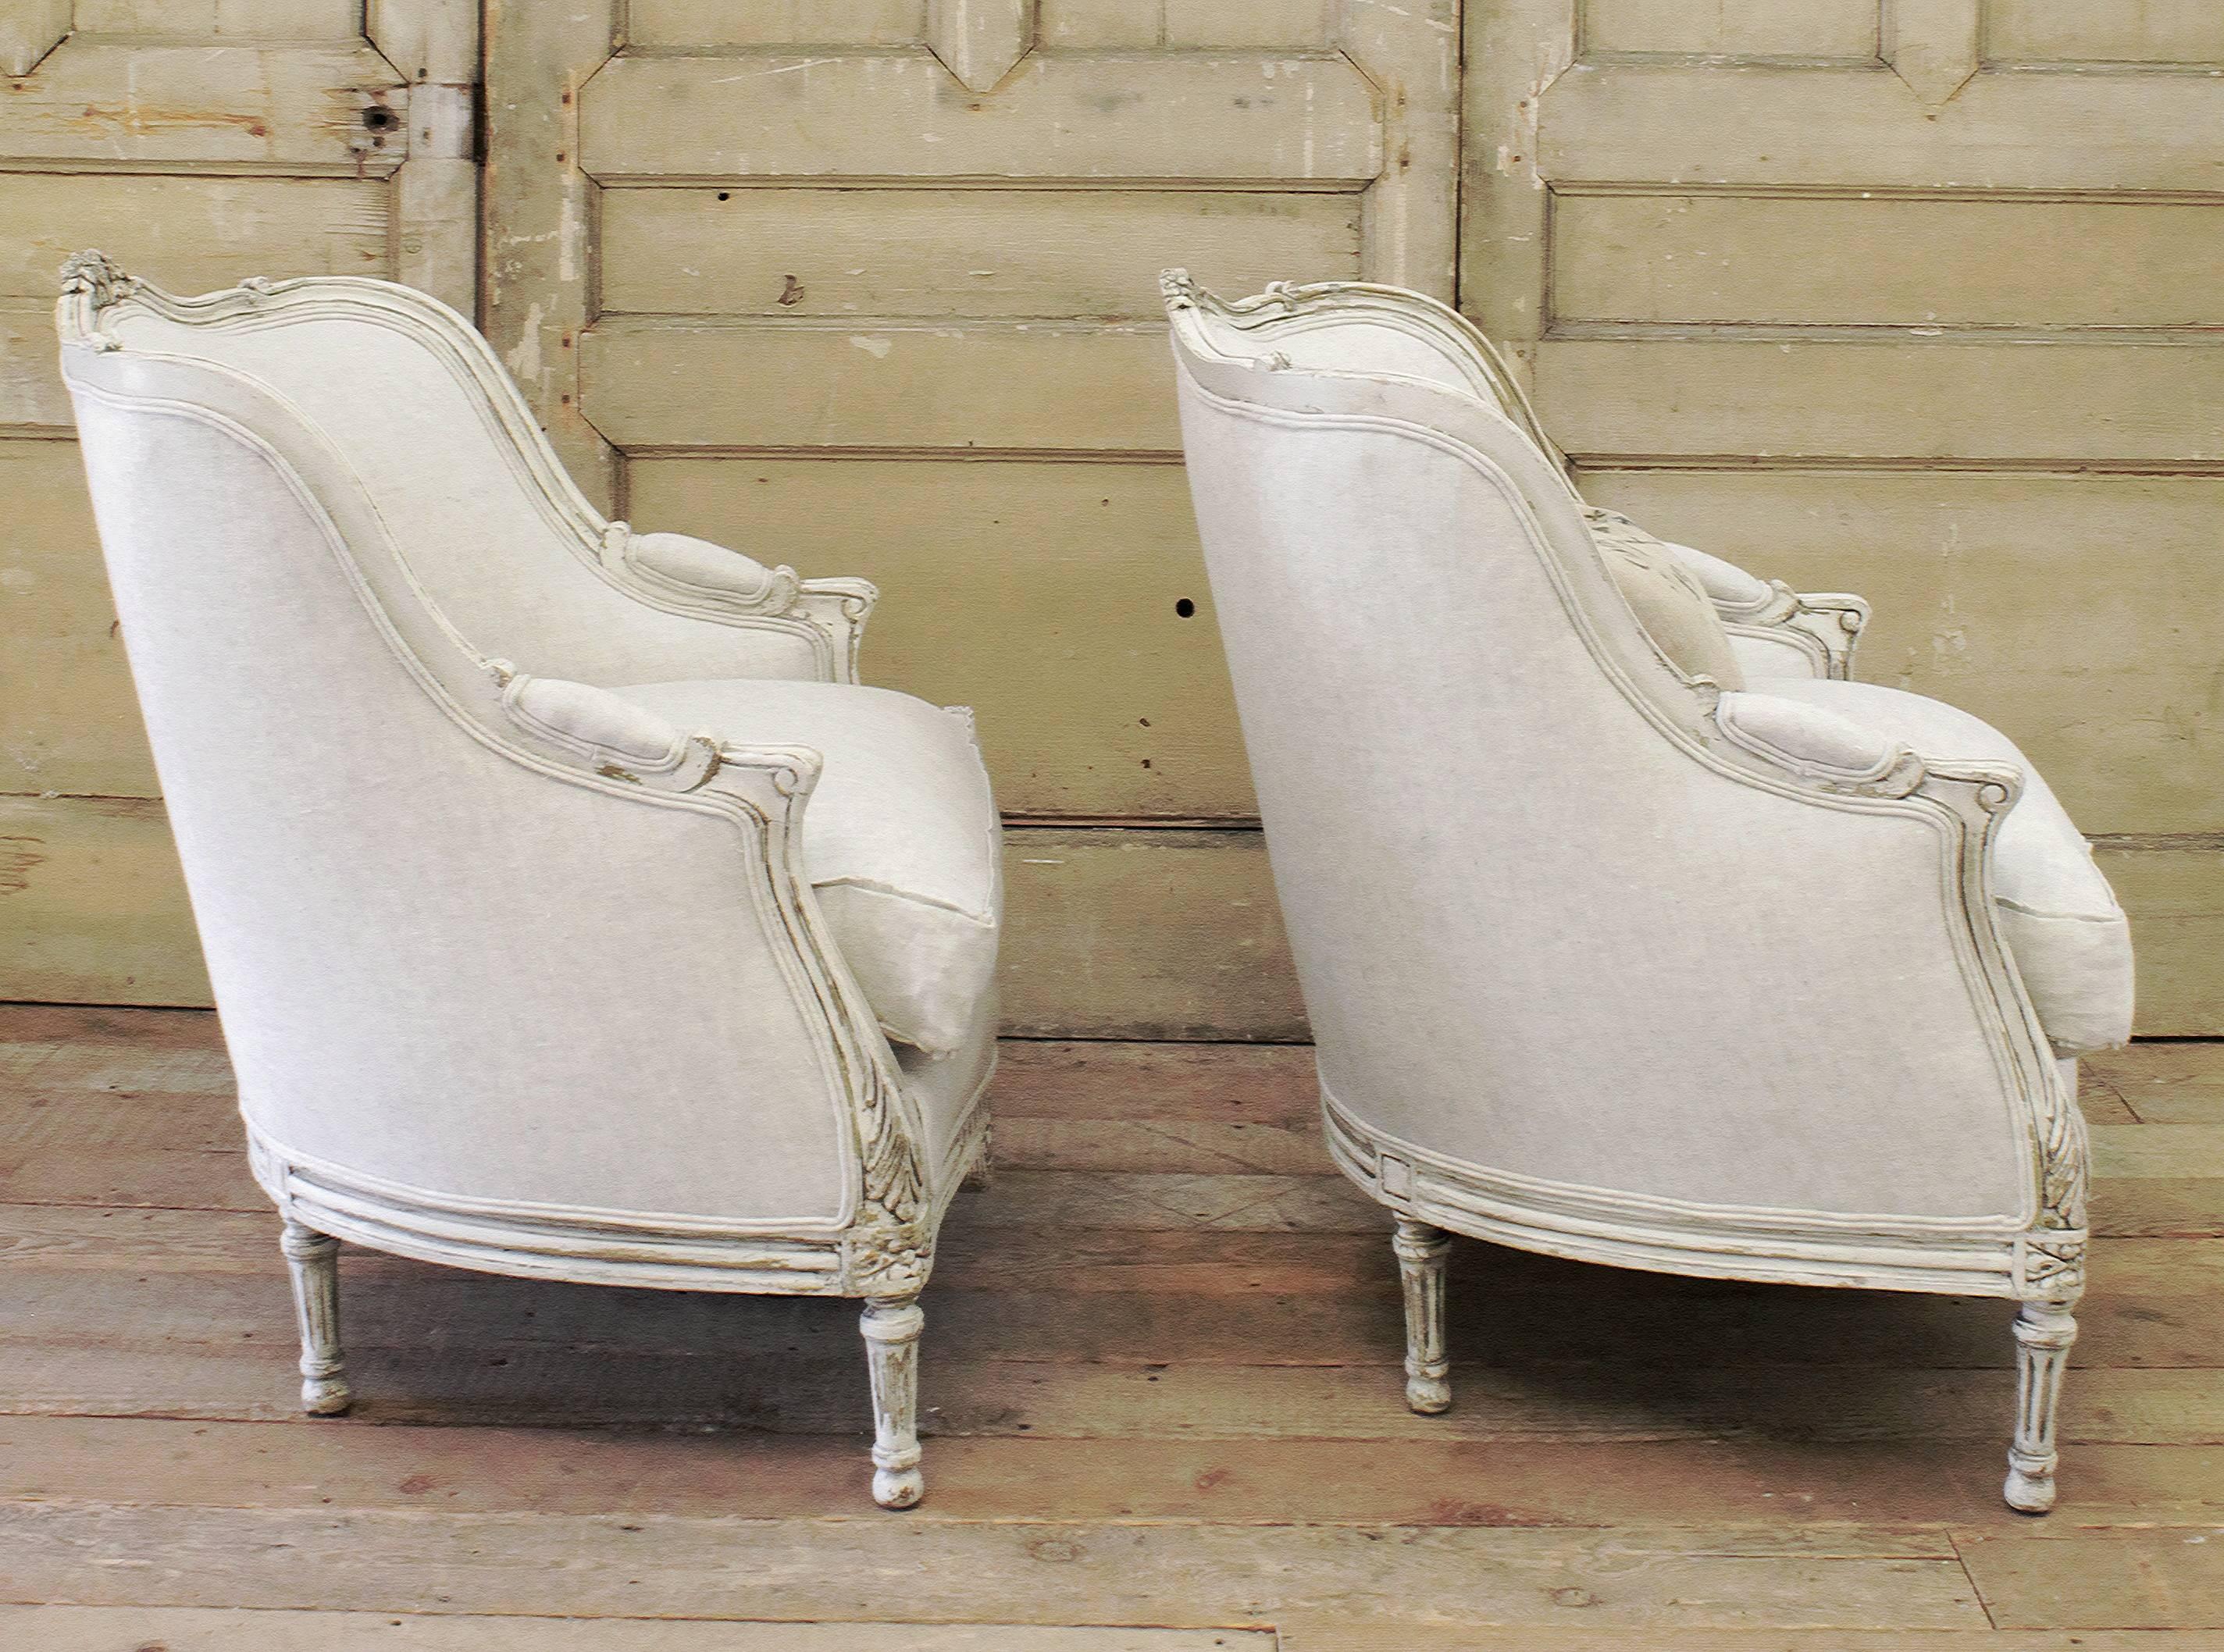 These chairs were painted in a soft oyster white, with antique patina, circa 1900, We reupholstered these in a heavy 15oz Belgian linen, color is a soft oatmeal which has natural and grey tones. 100% Pure Linen.
New down wrapped seat cushions,